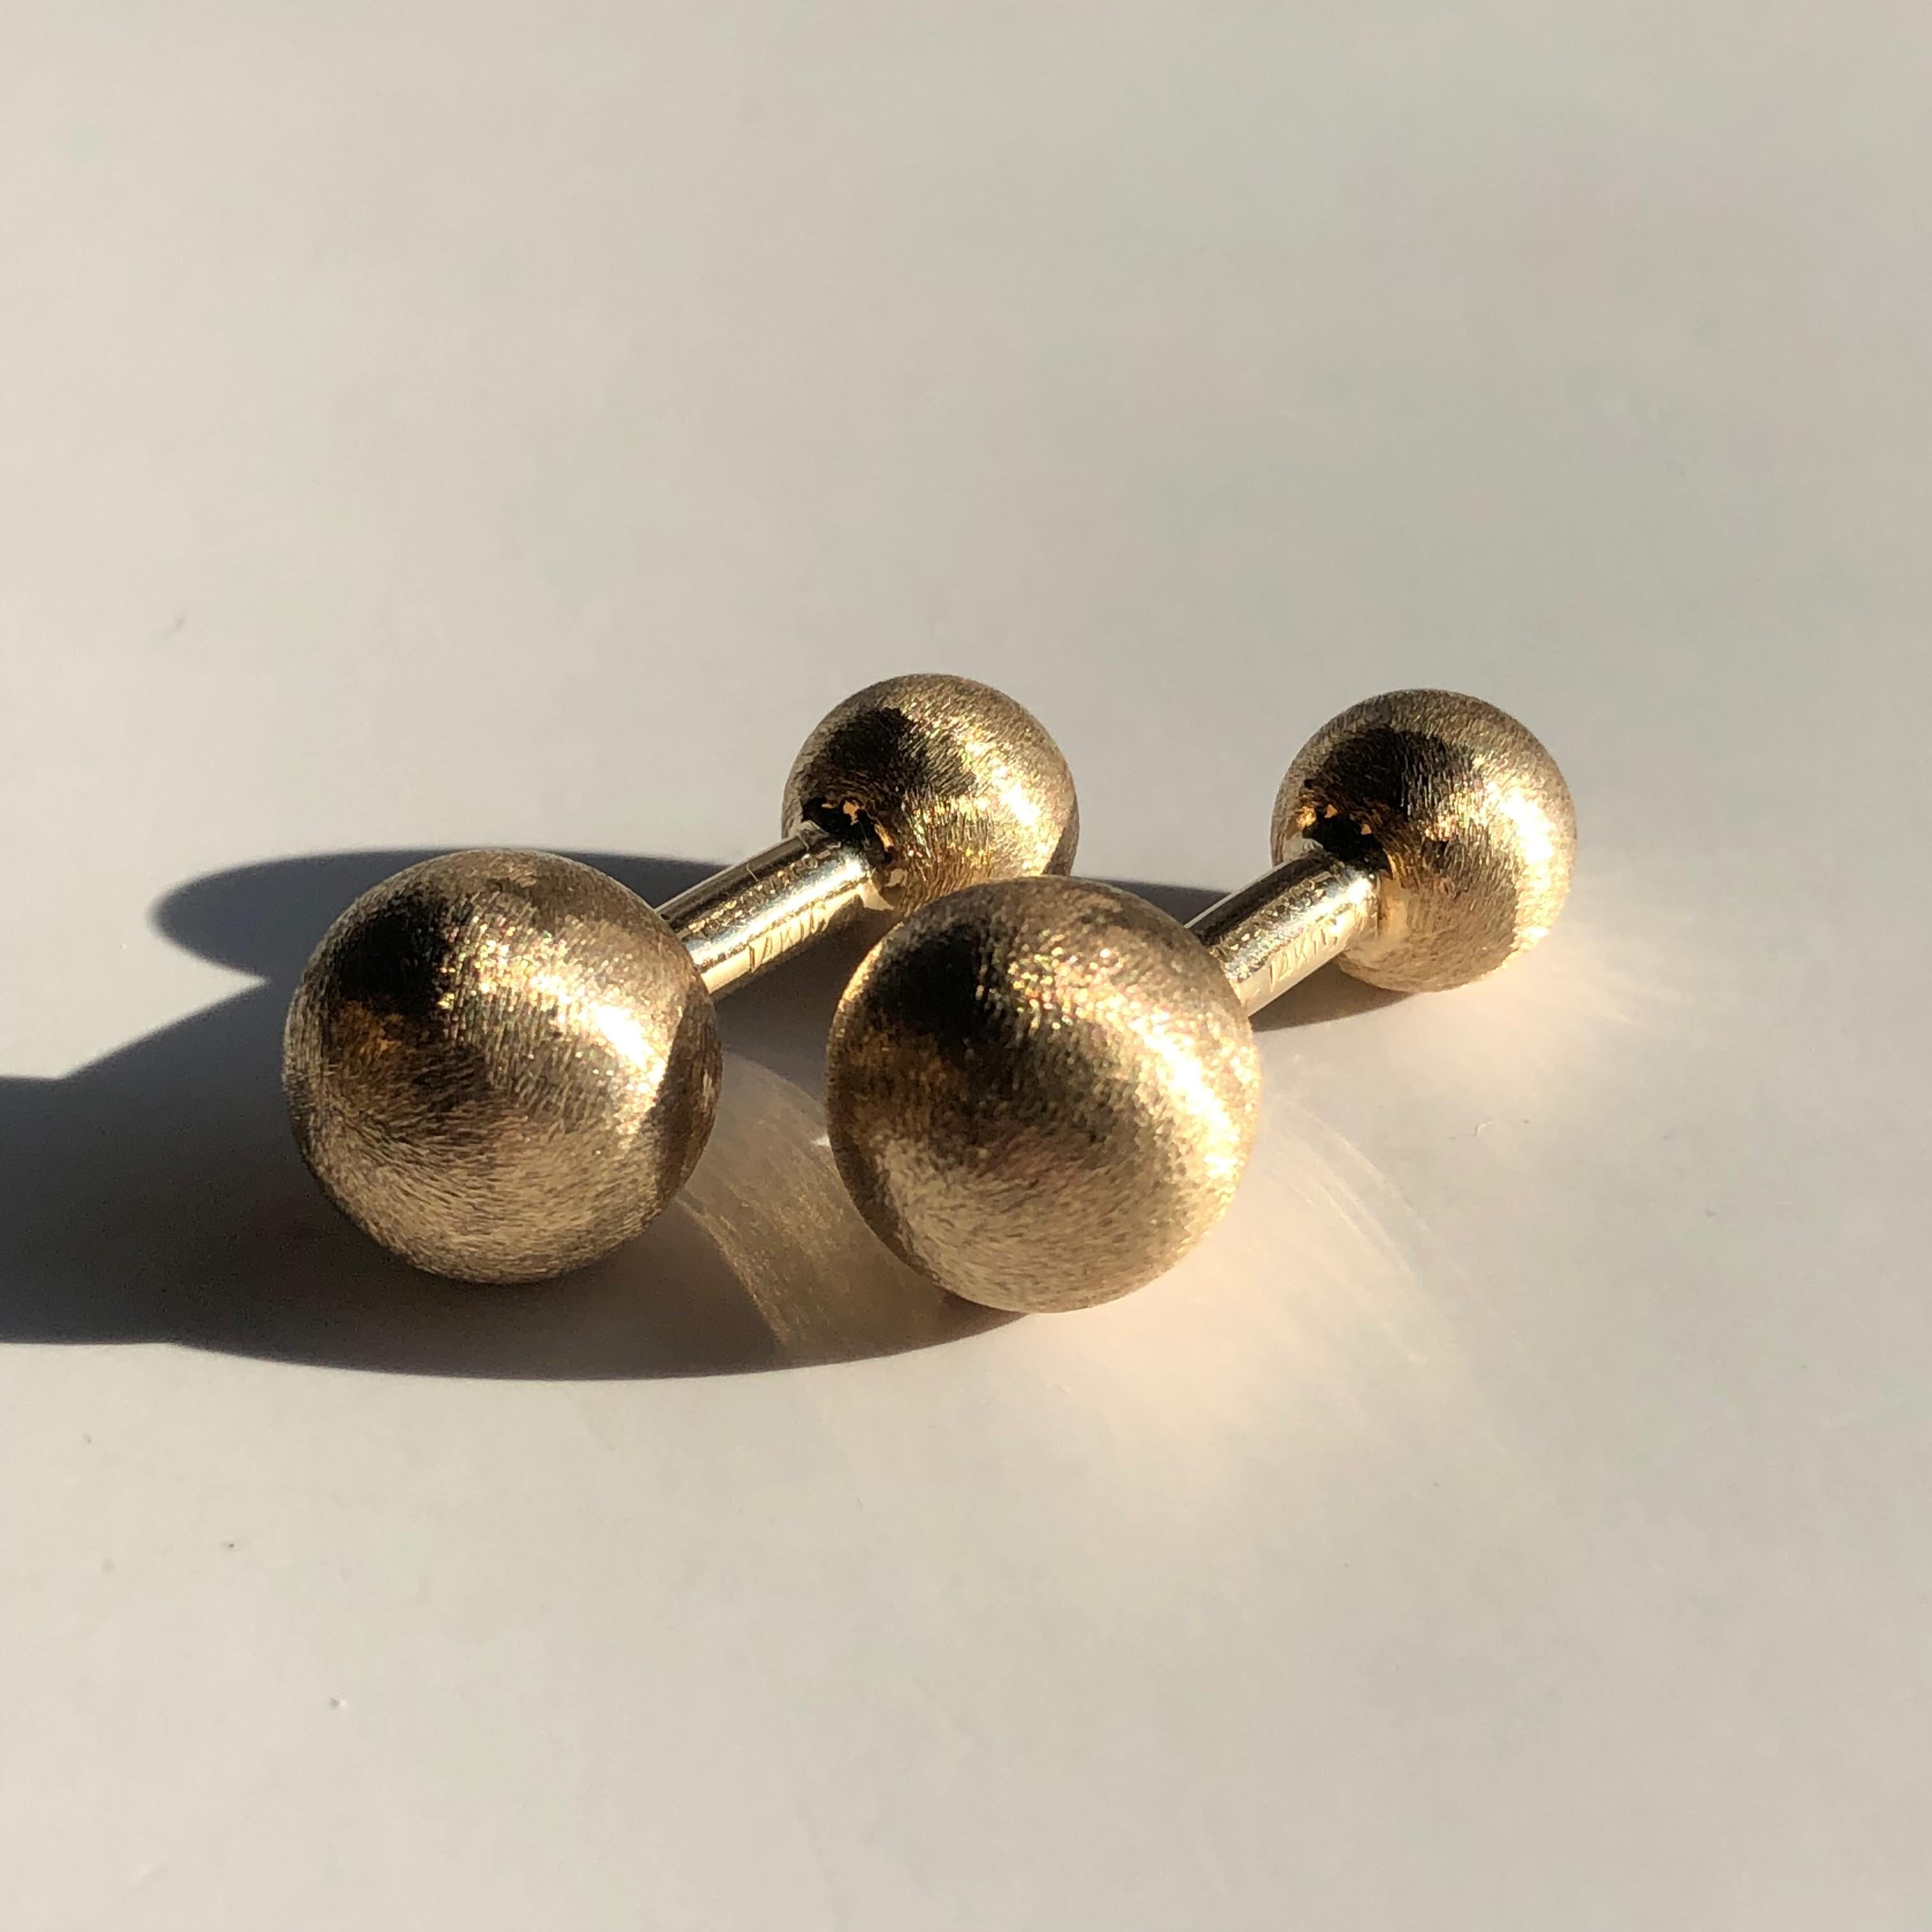 A Pair of Genuine Tiffany & Co Barbell Cufflinks in 14K Yellow Gold 

In brushed gold with polished gold bar

Very smart and wearable easy to use with the rigid bar

An Outstanding buy as to purchase these today in Tiffanys would be in the Thousands